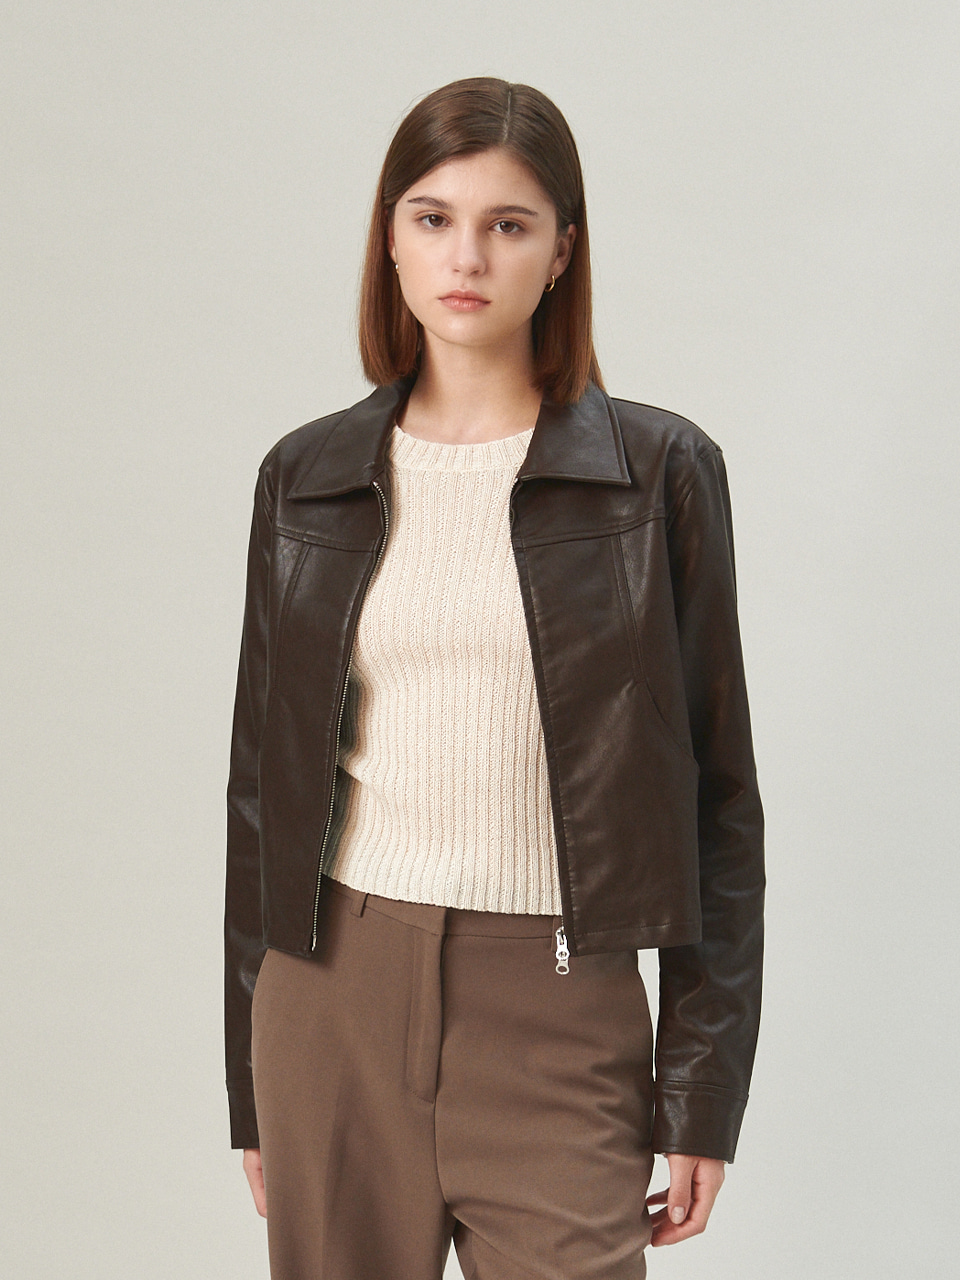 Faux Leather Crop Jacket - brown포 레더 크롭 자켓